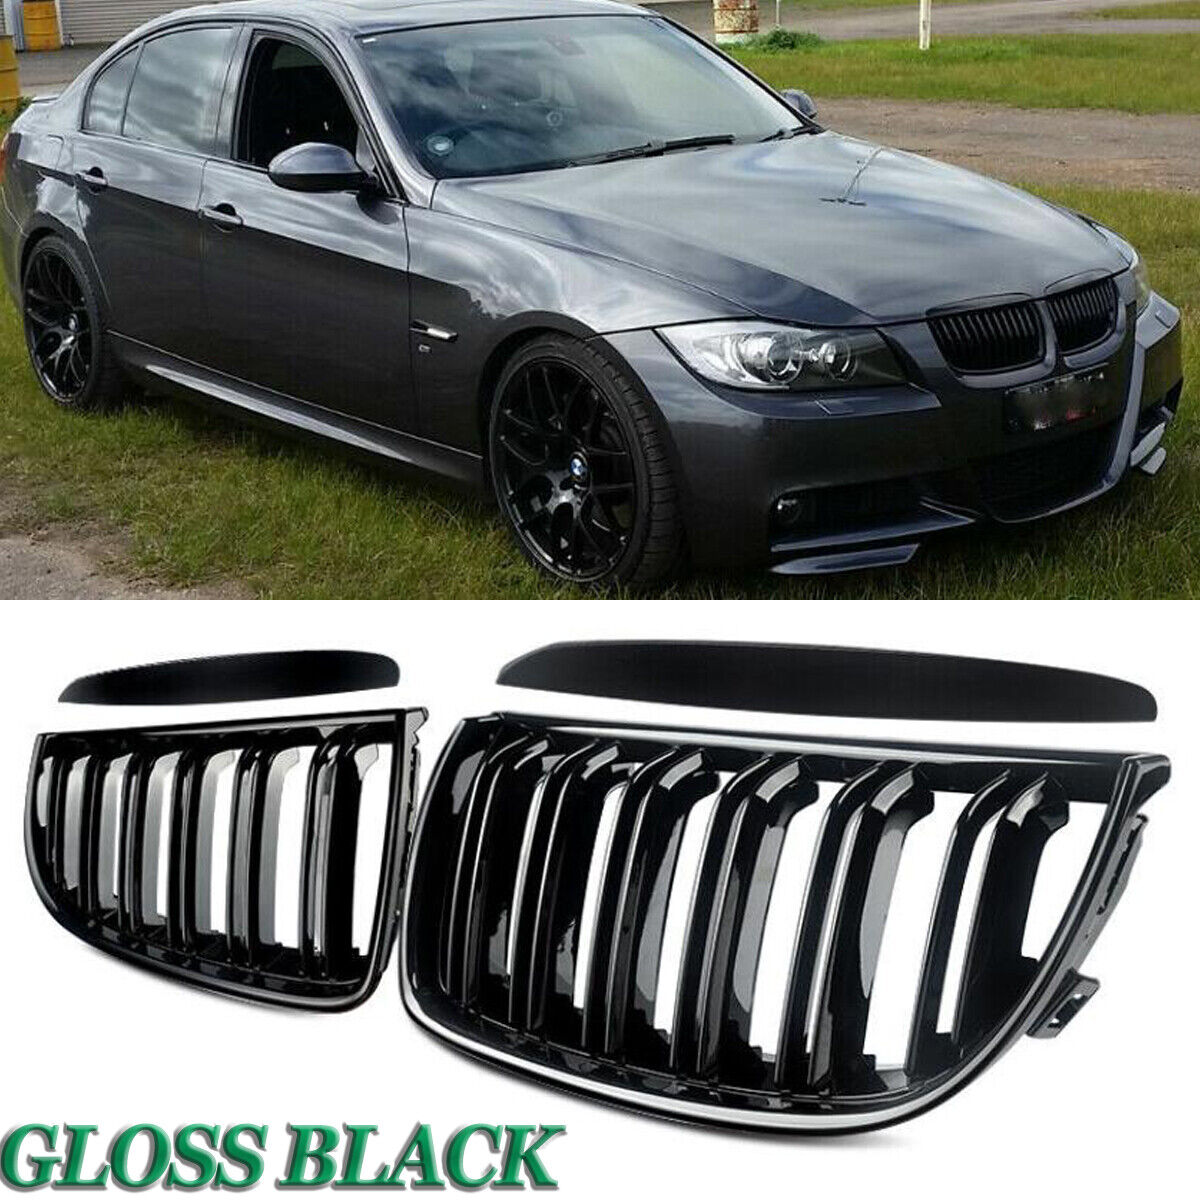 2X Gloss Black Front Kidney Grille Grill For BMW E90 E91 4DR 2005-08 Pre-LCI